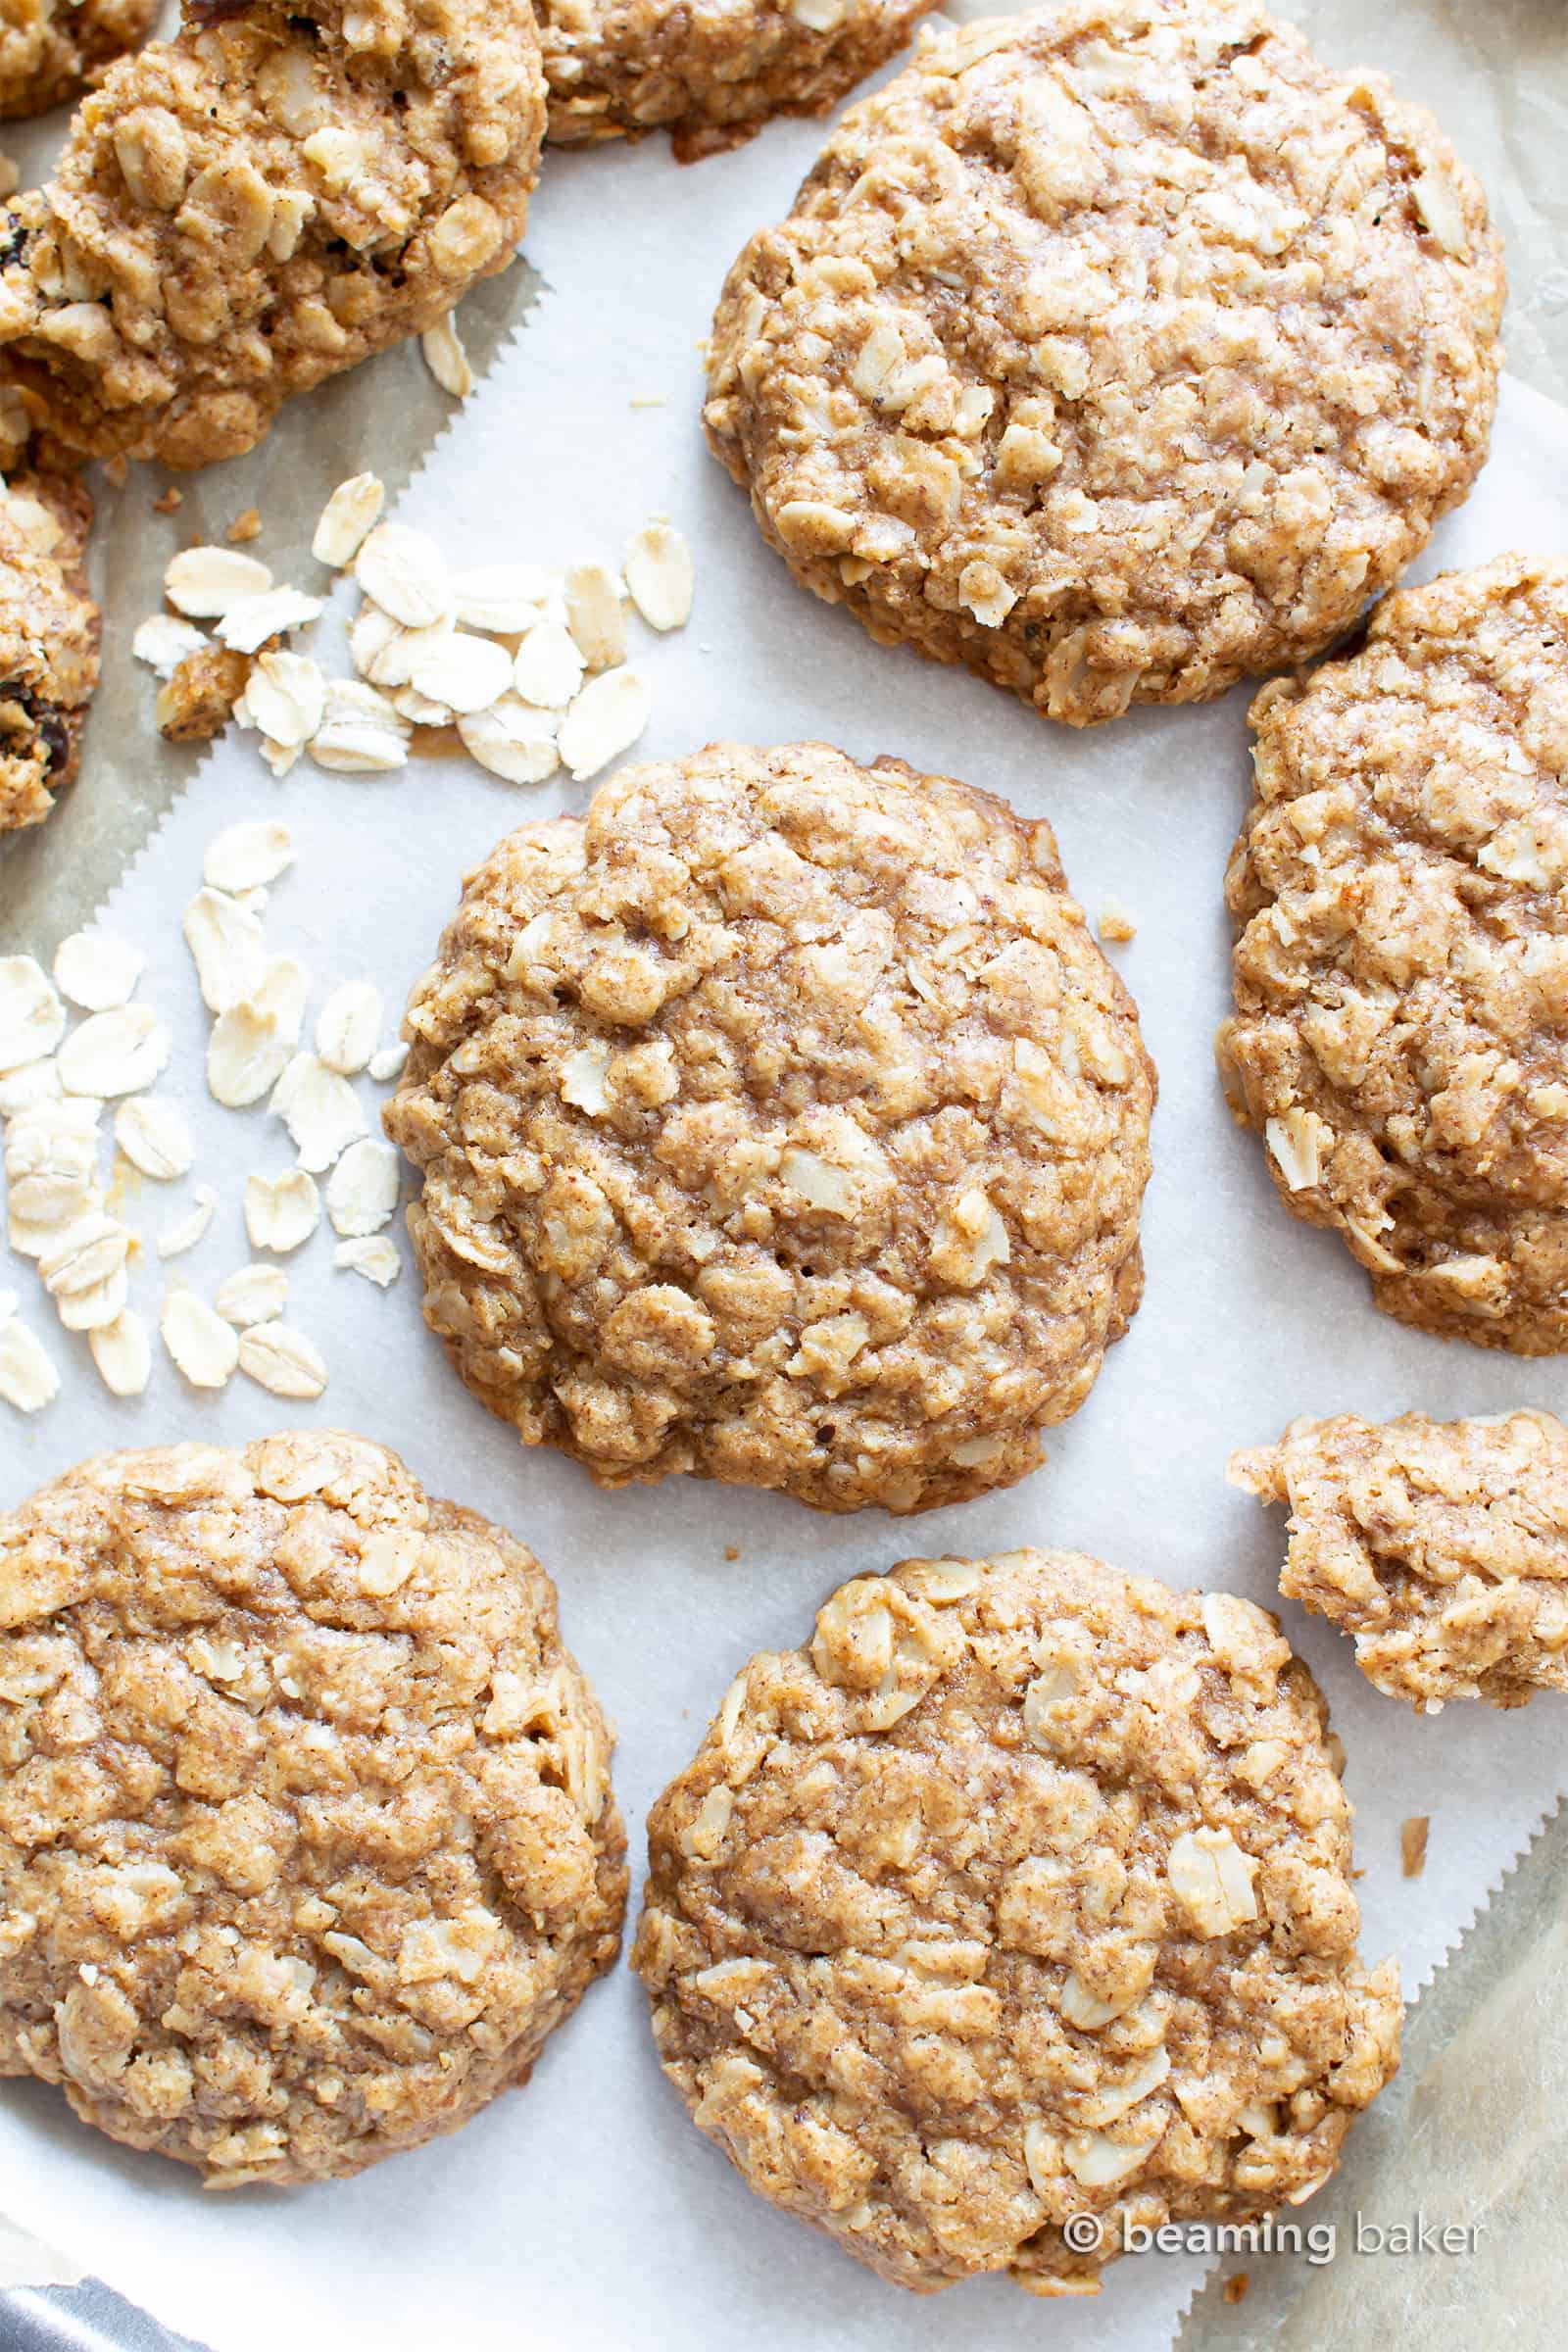 Easy Vegan Oatmeal Cookies (GF): a Simple recipe for the BEST Vegan Oatmeal Cookies! Chewy, moist centers with crispy, caramel-y edges & packed with comforting oatmeal. #OatmealCookies #Vegan #GlutenFree #Cookies | Recipe at BeamingBaker.com